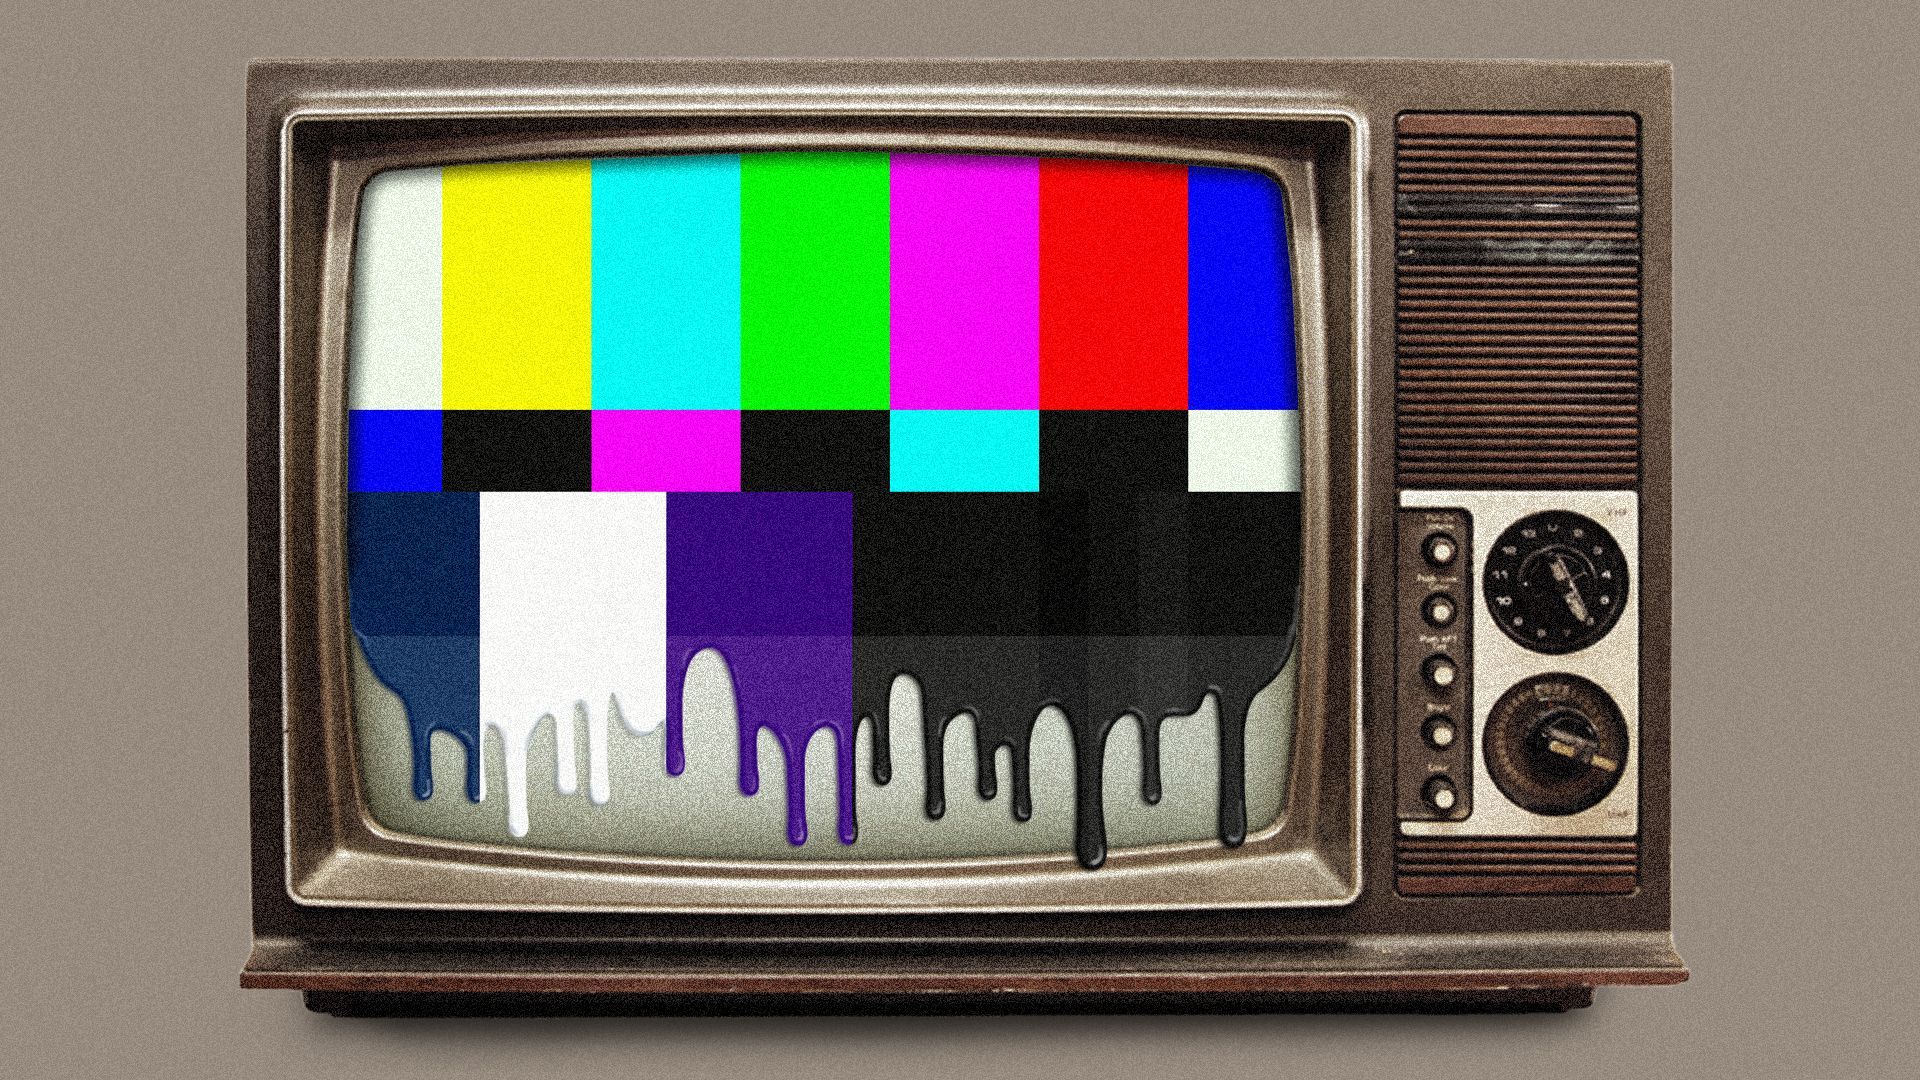 Illustration of a television with a test pattern dripping off the screen.